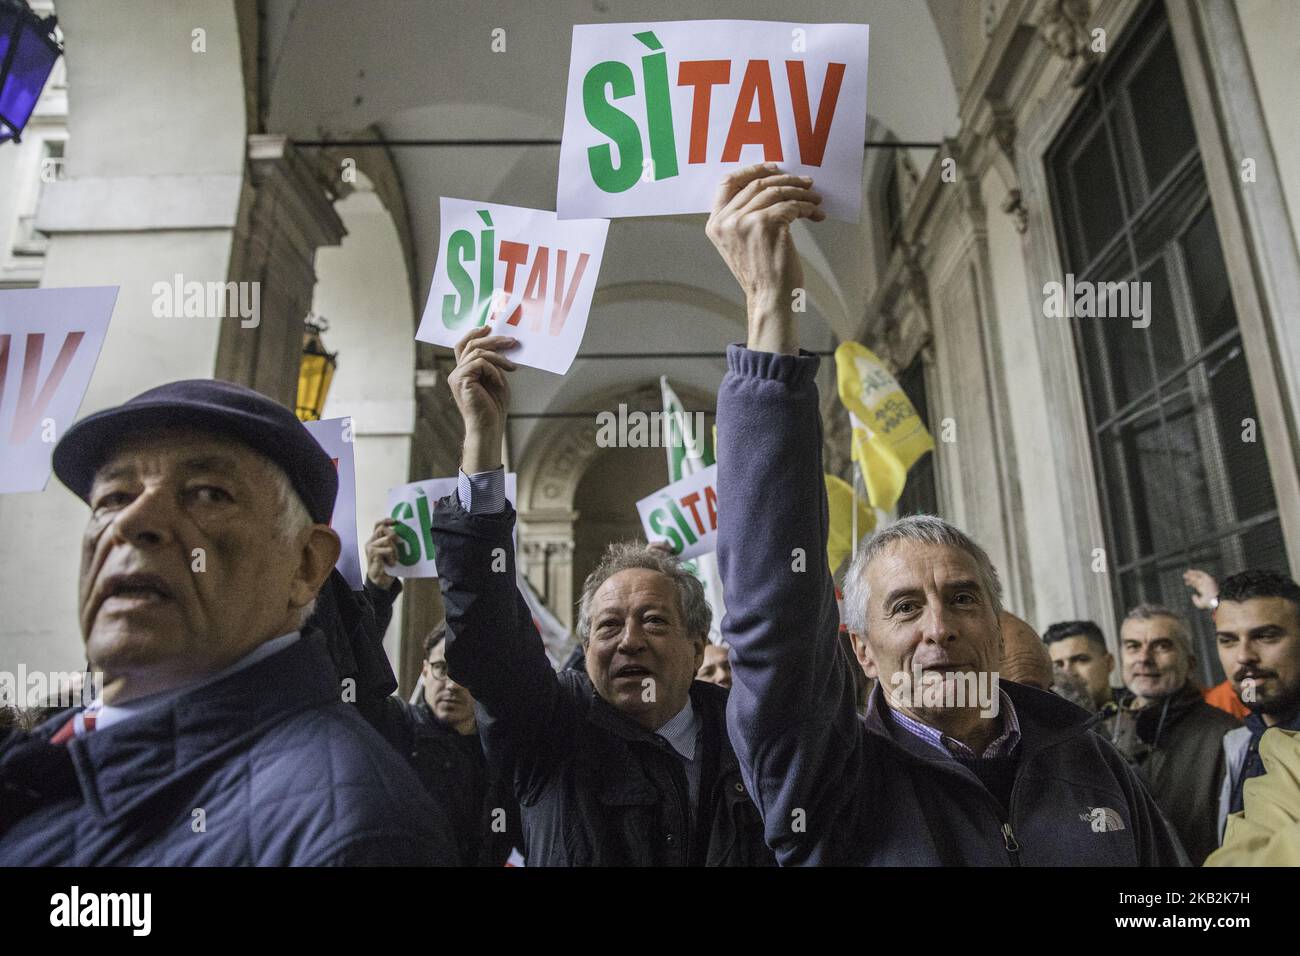 29/10/2018, Torino Italy. In the day where the town council voted to stop the project of the high speed train two different party meet in front of city hall, one against high speed train and one favorable at the construction of the new railway that will connect Torino with Lyon in France. In the picture people shown a poster supporting the project. (Photo by Mauro Ujetto/NurPhoto)  Stock Photo